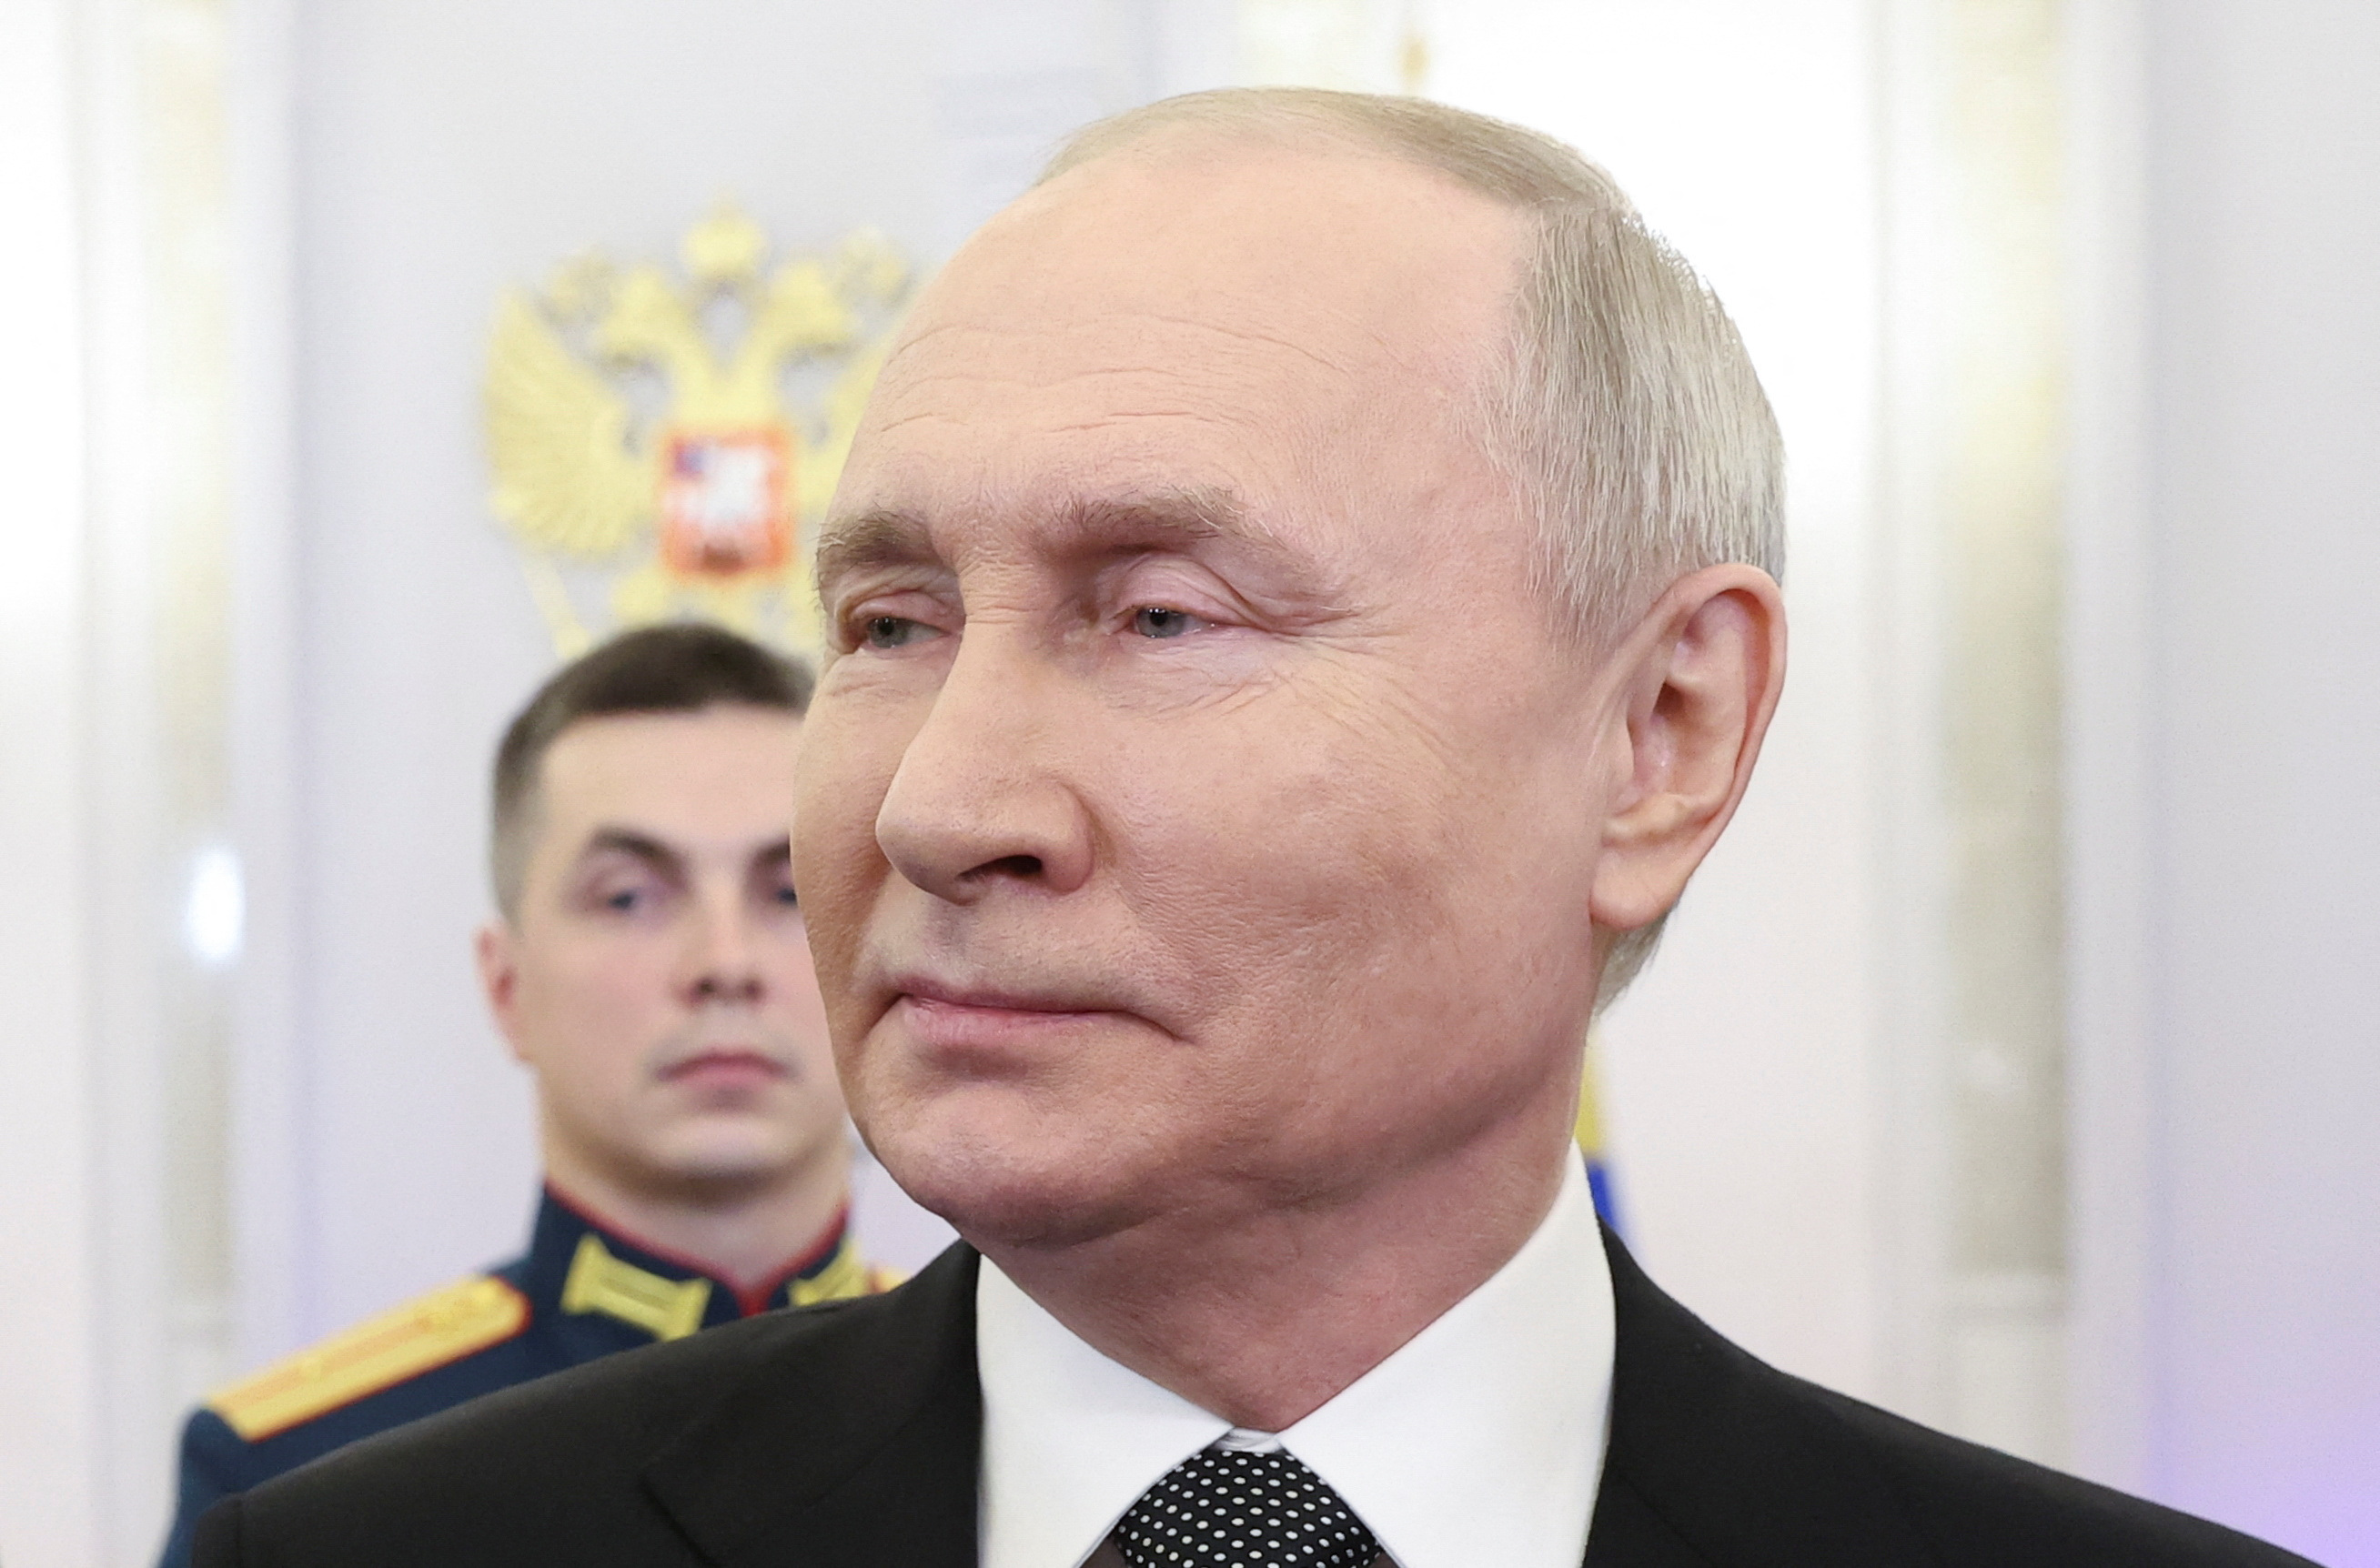 Putin will seek another presidential term in Russia, extending his rule of  over two decades